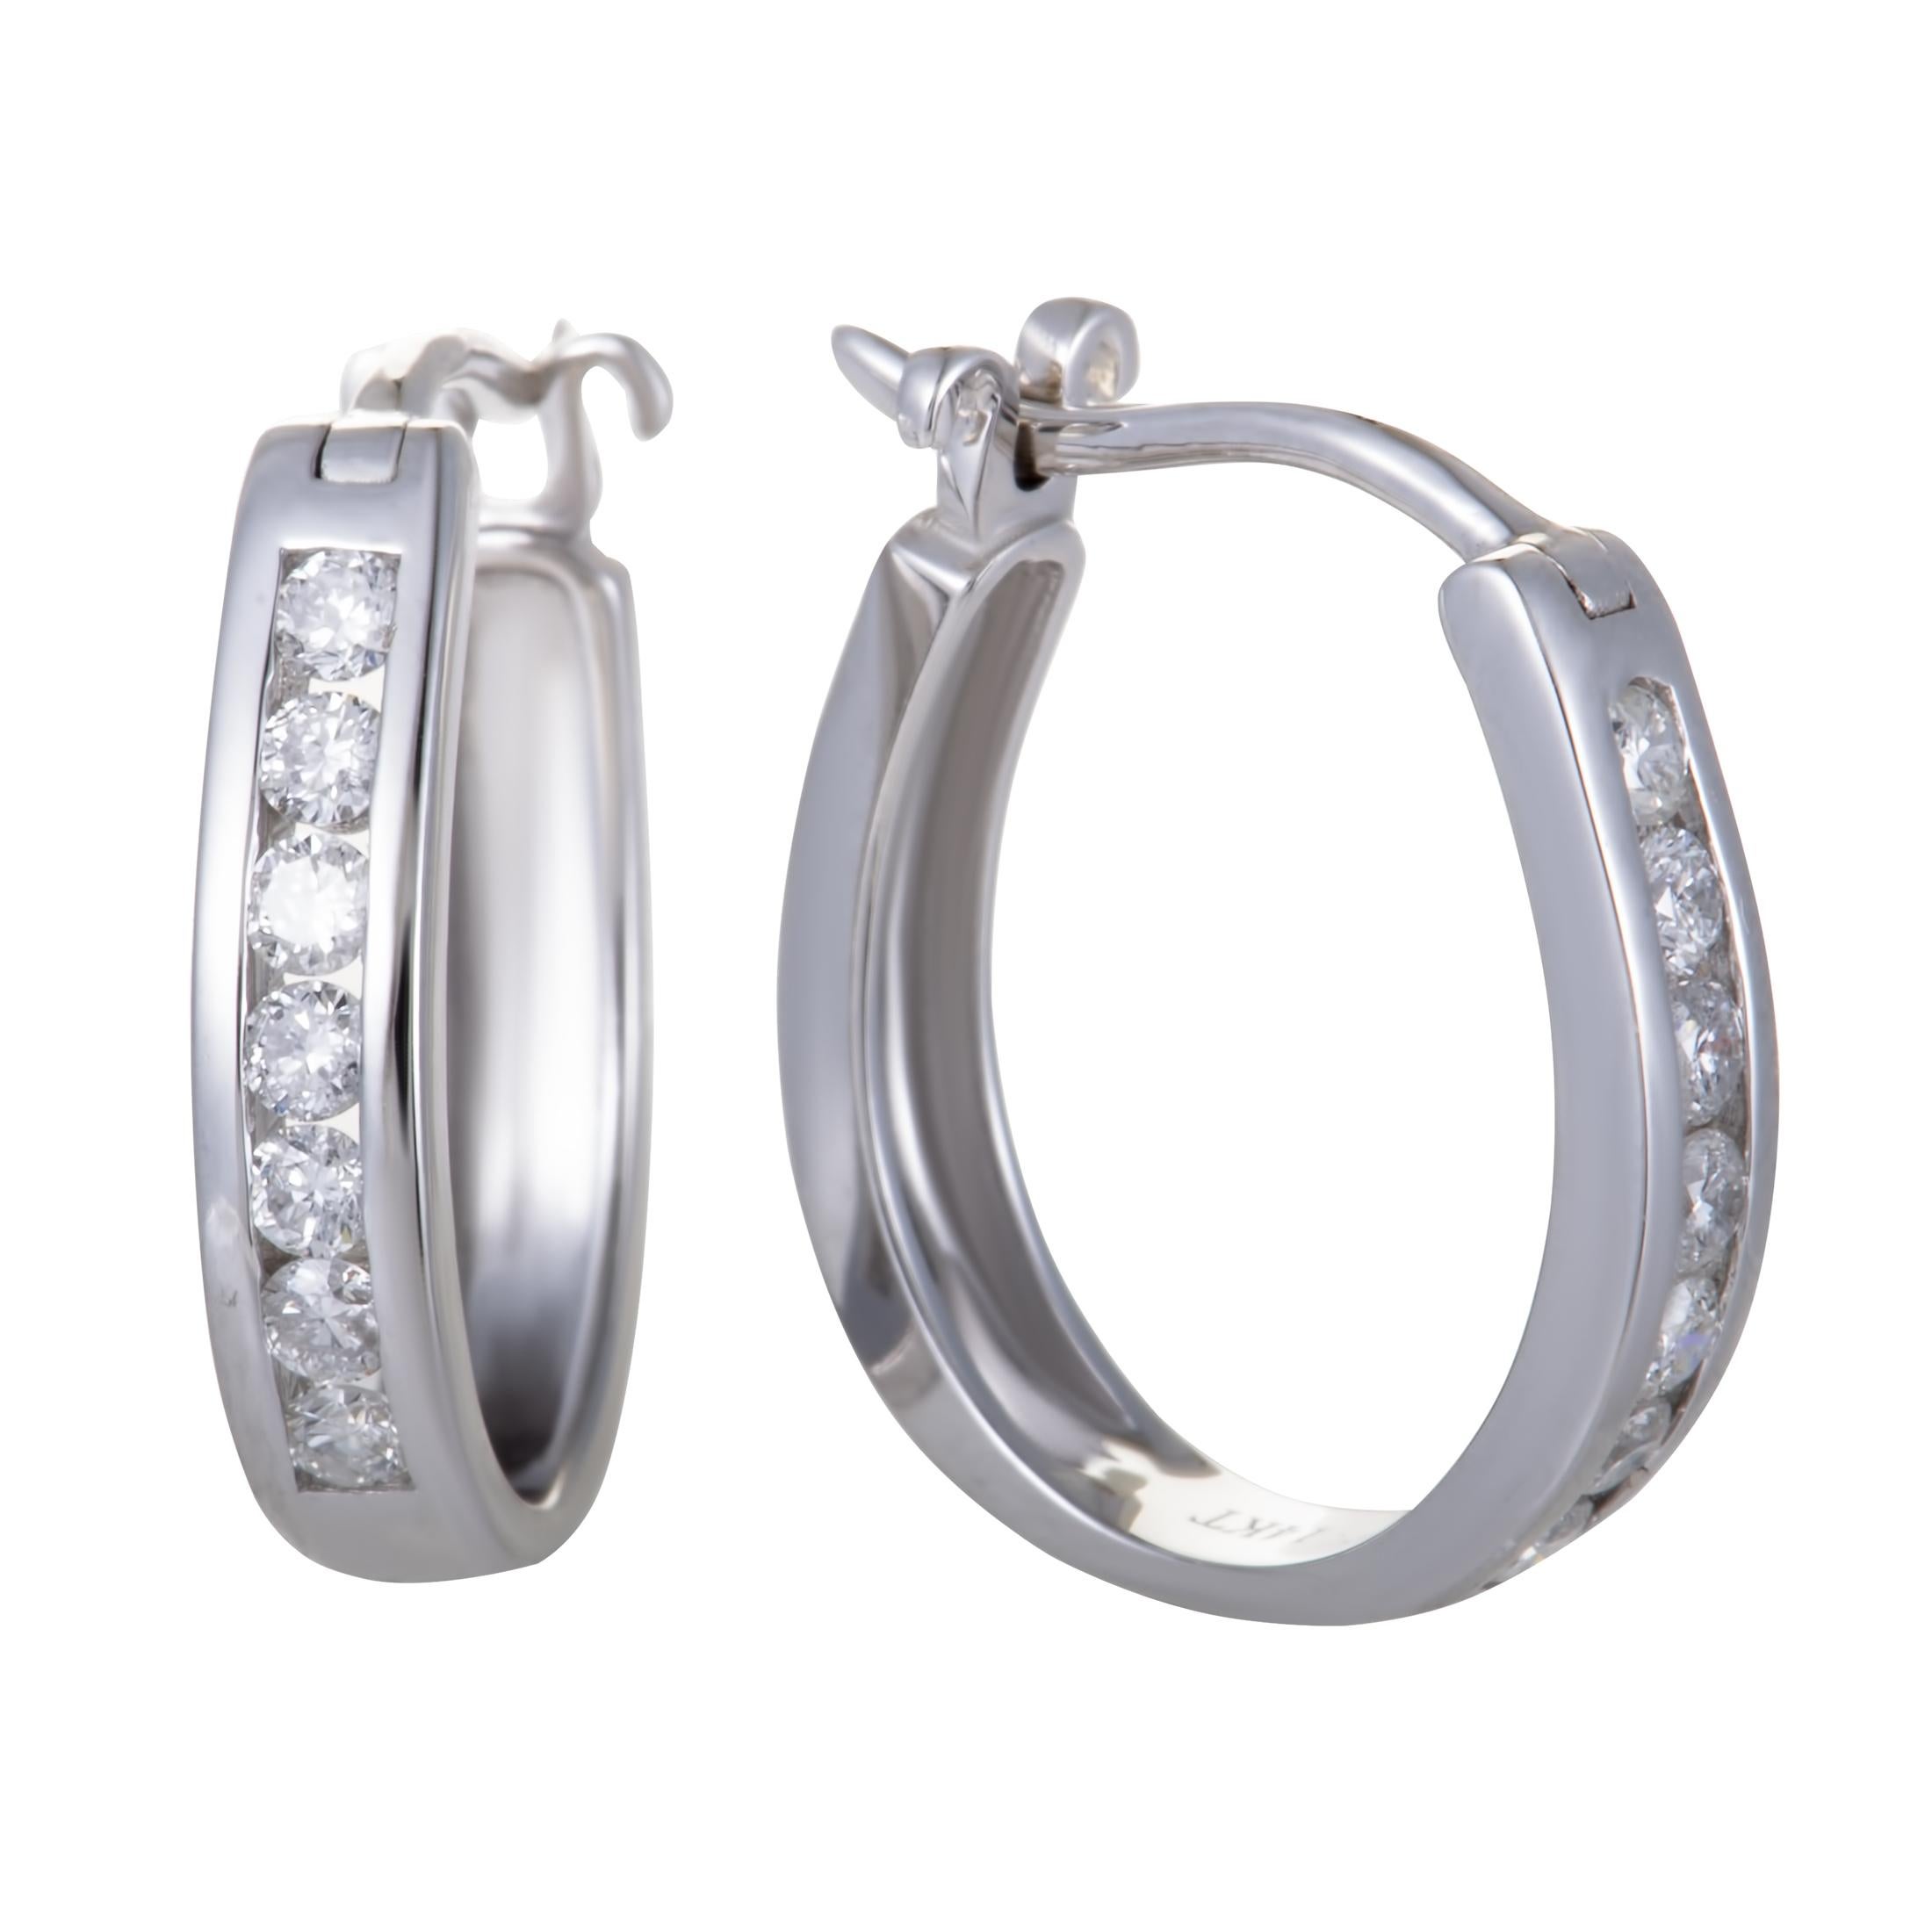 The elegantly gleaming 14K white gold and the luxuriously glistening diamond stones complement each other wonderfully in these gorgeous hoop earrings that offer a delightfully classy appearance. The pair weighs 2.6 grams and the diamonds total 0.33